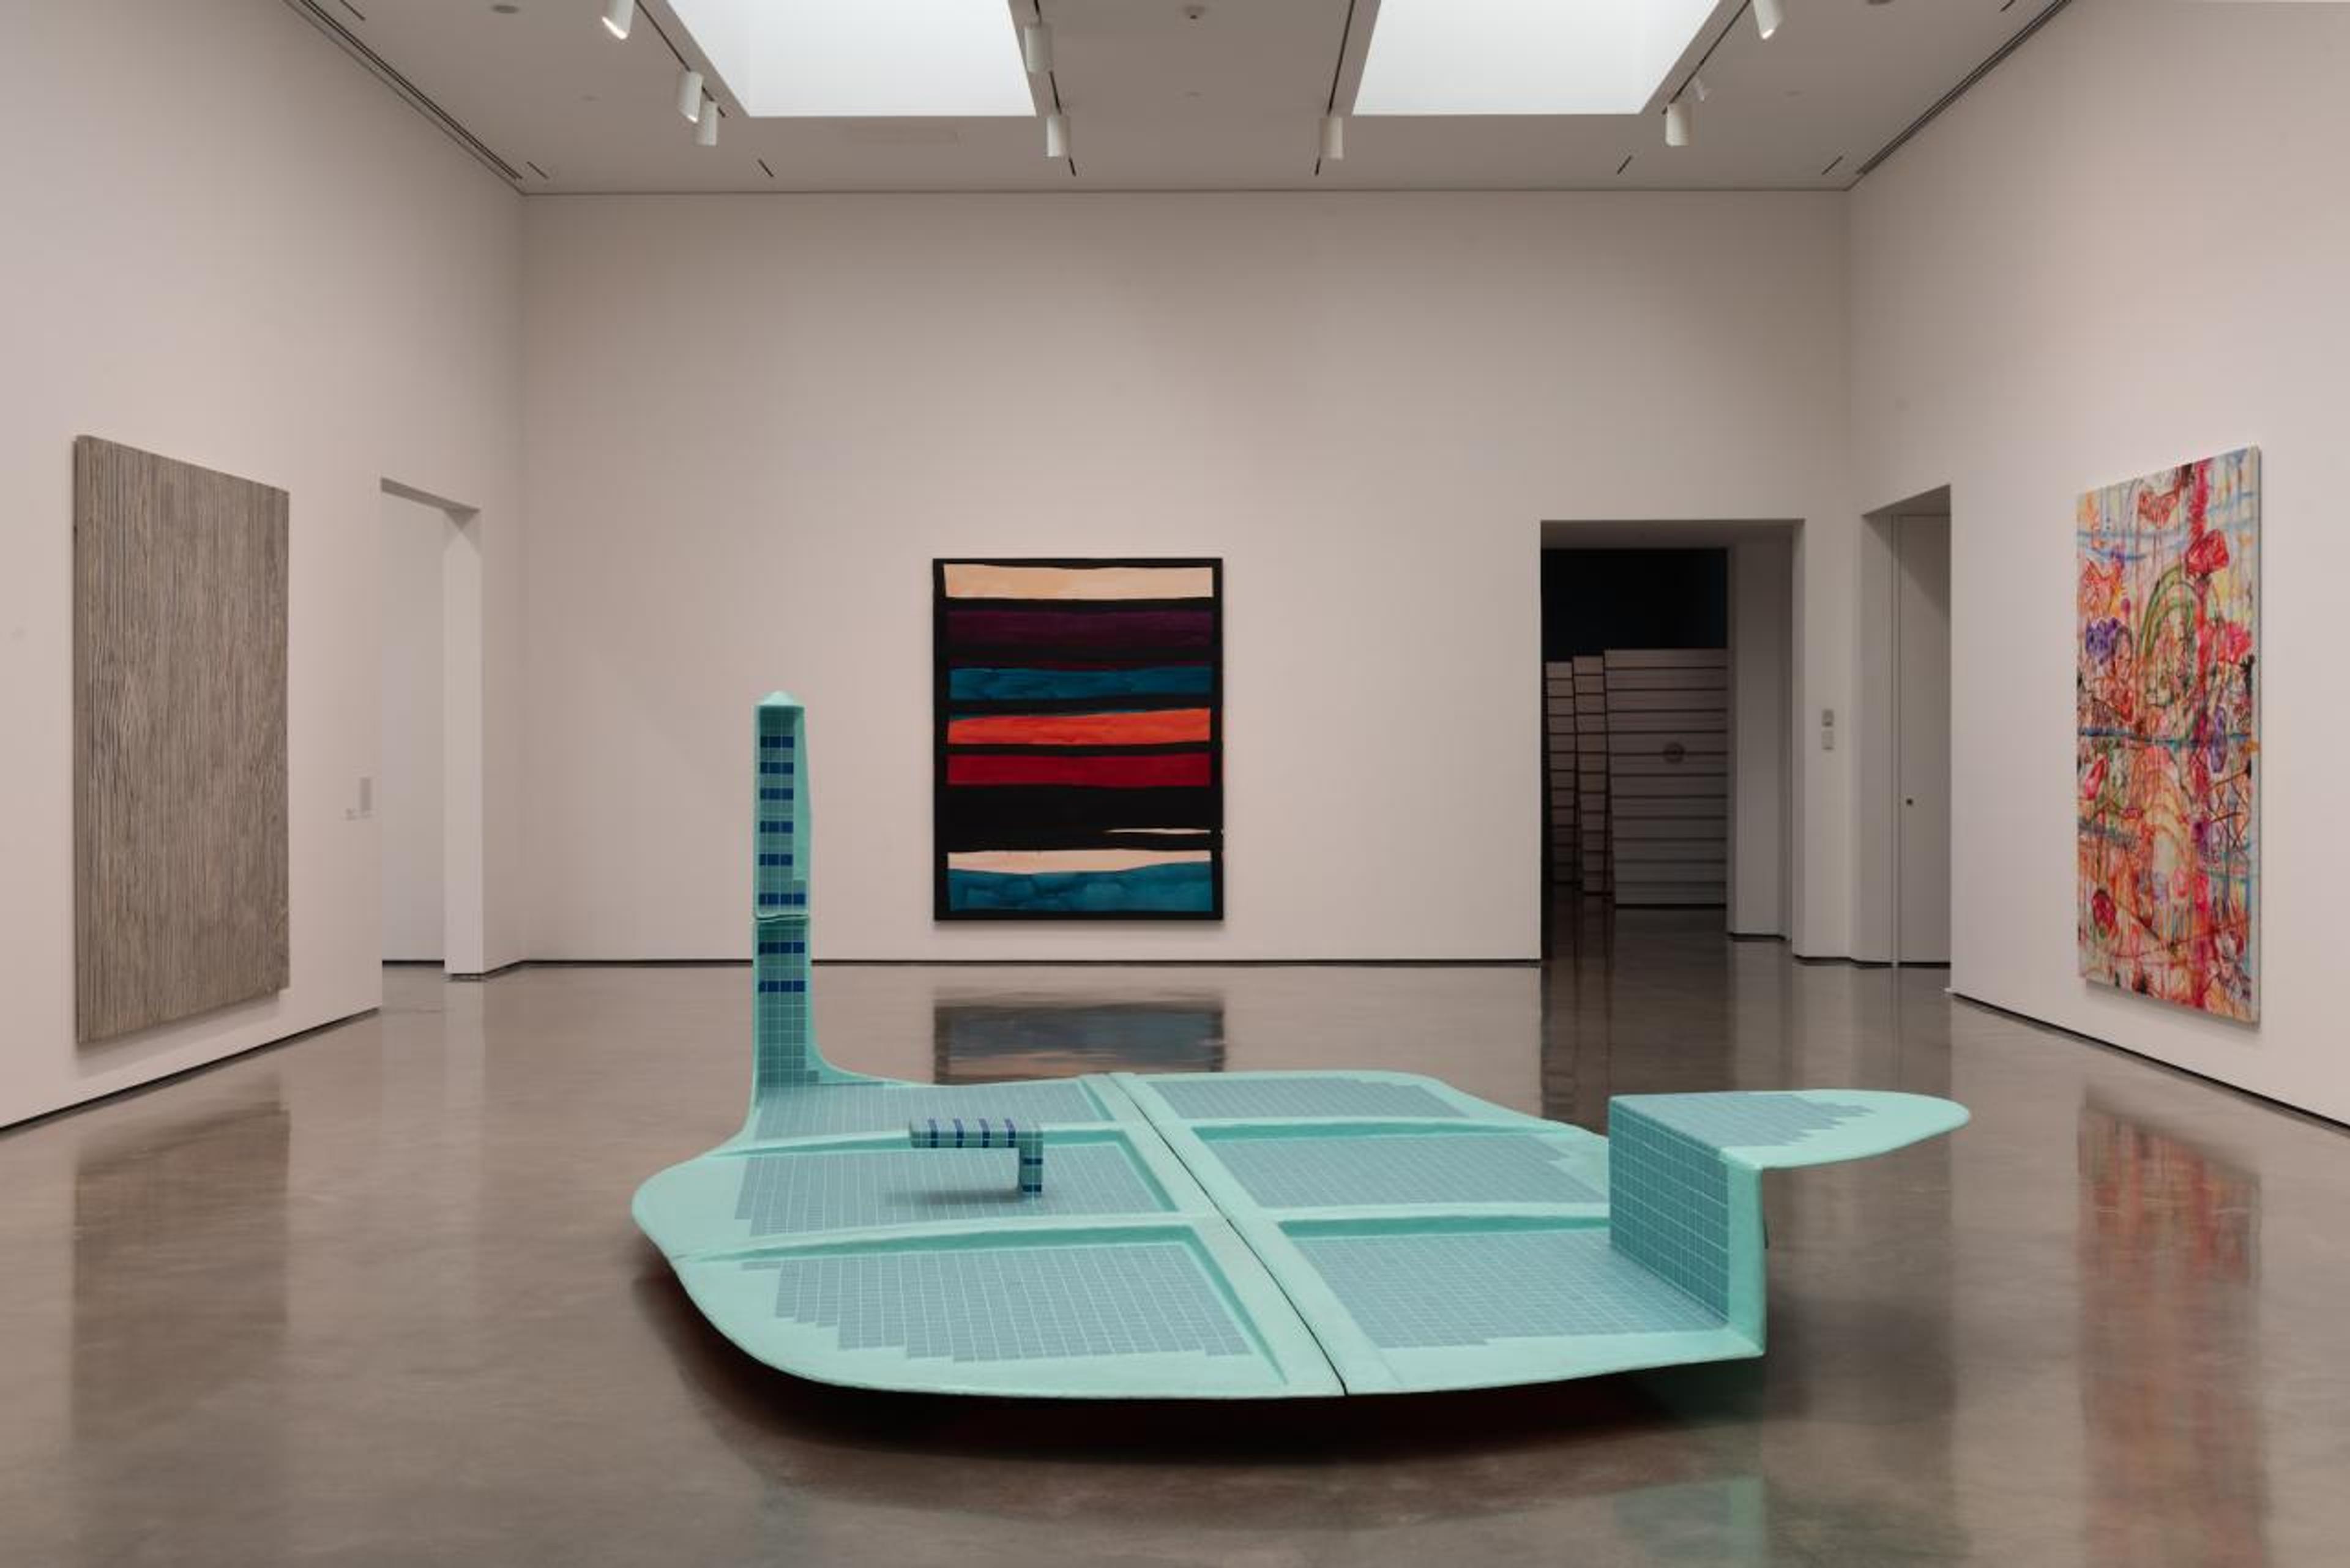 &ldquo;The Conditions of Being Art: Pat Hearn Gallery and American Fine Arts, Co. (1983&ndash;2004)&rdquo;, Hessel Museum of Art , 2018, Exhibition view